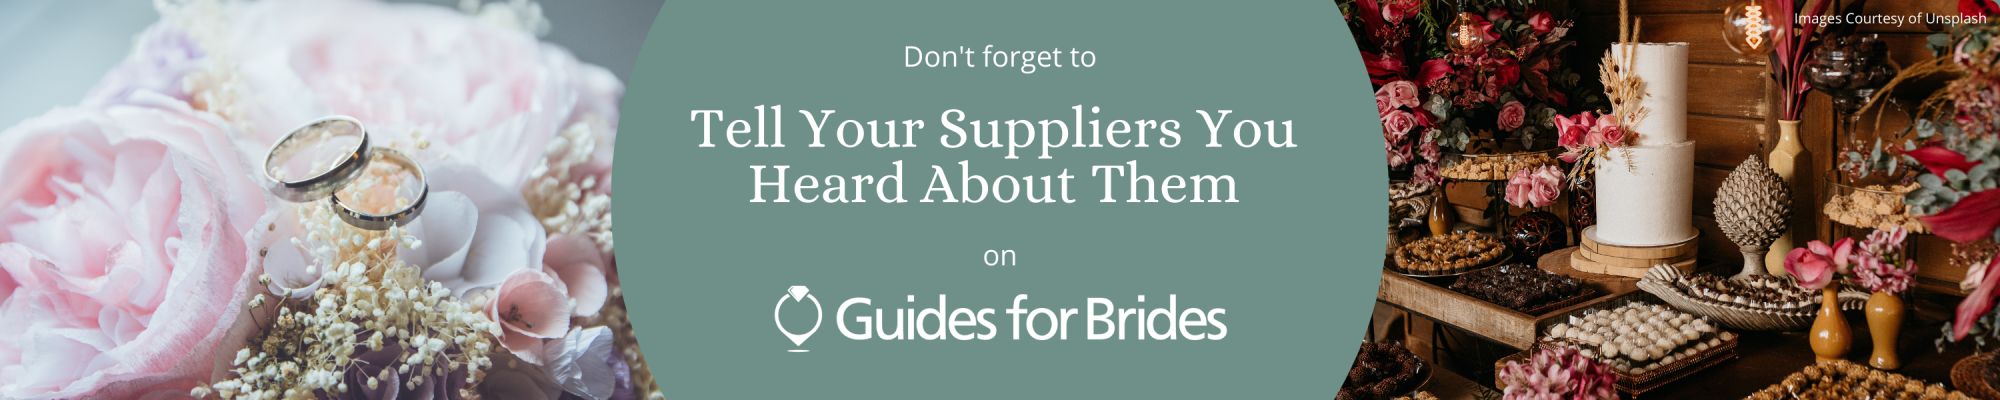 Dont forget to mention Guides for Brides